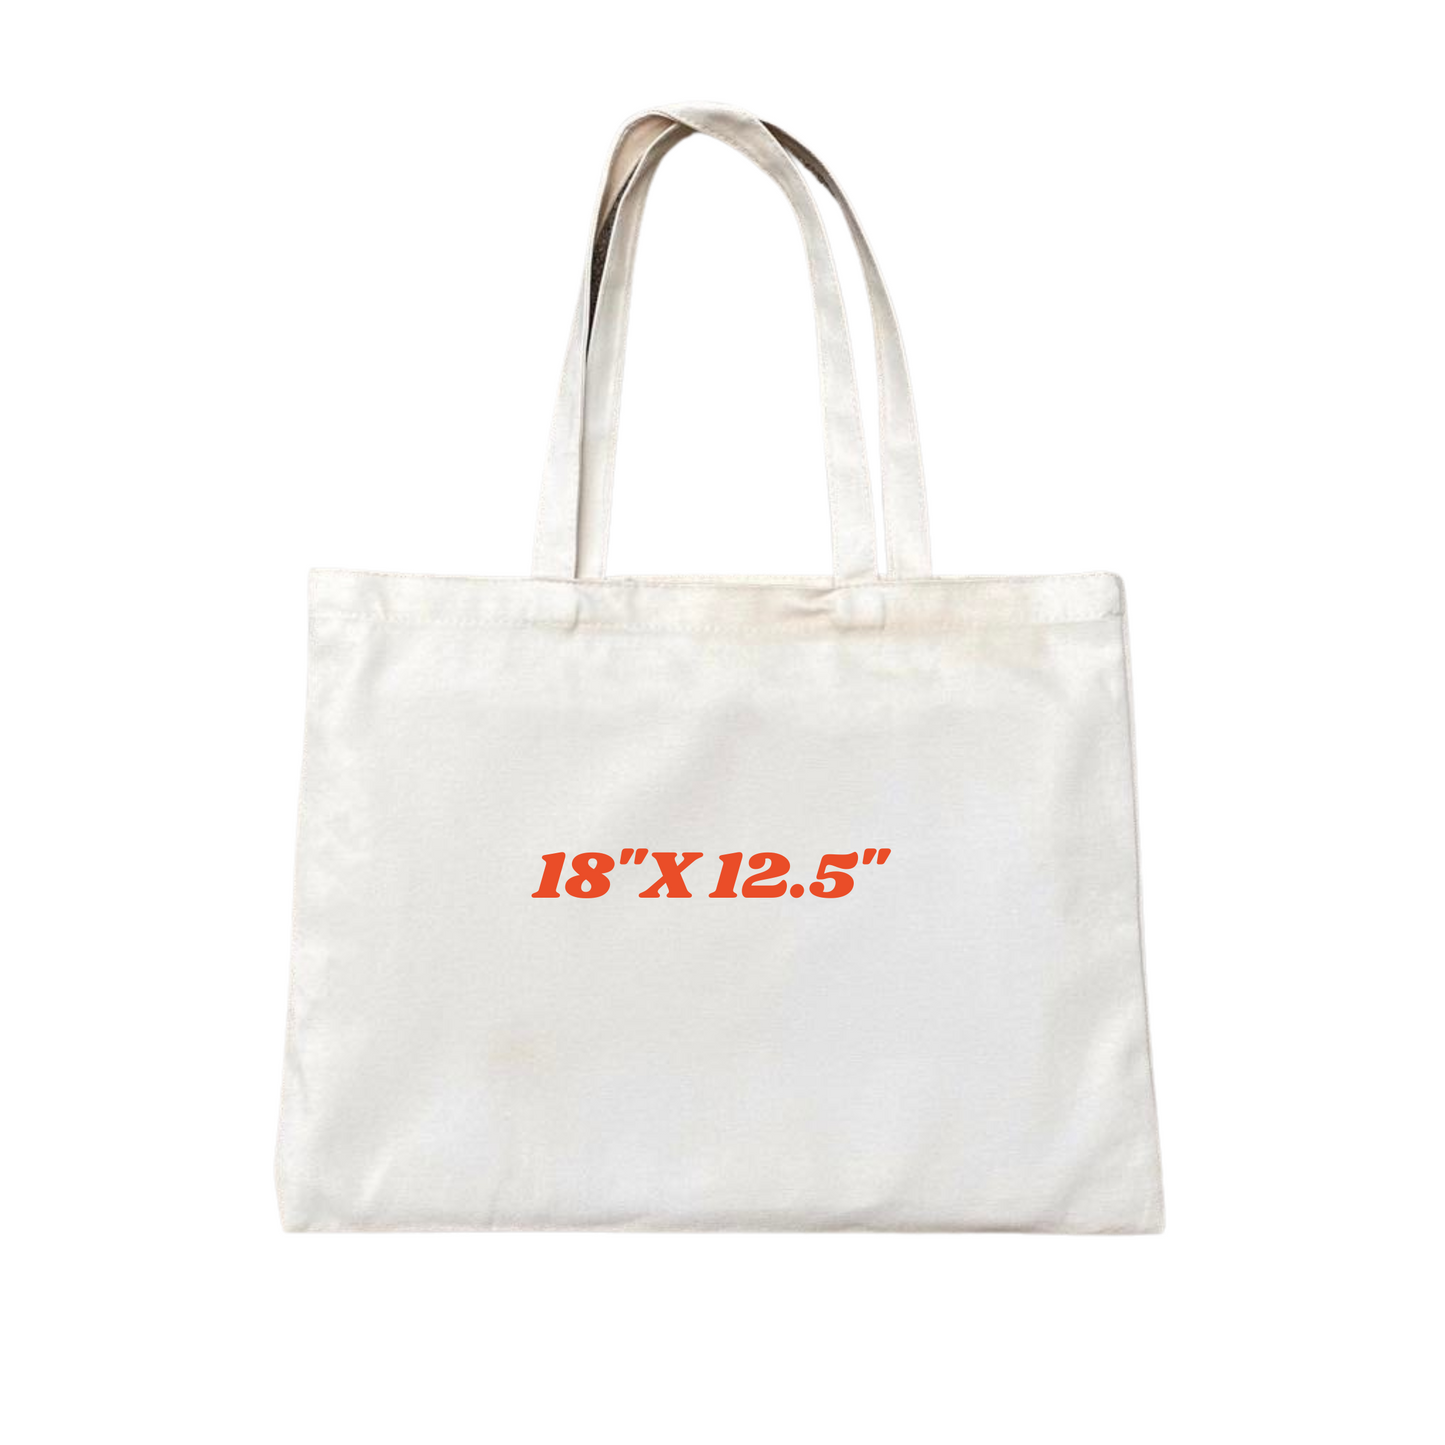 Don't Be Ableist Tote Bag